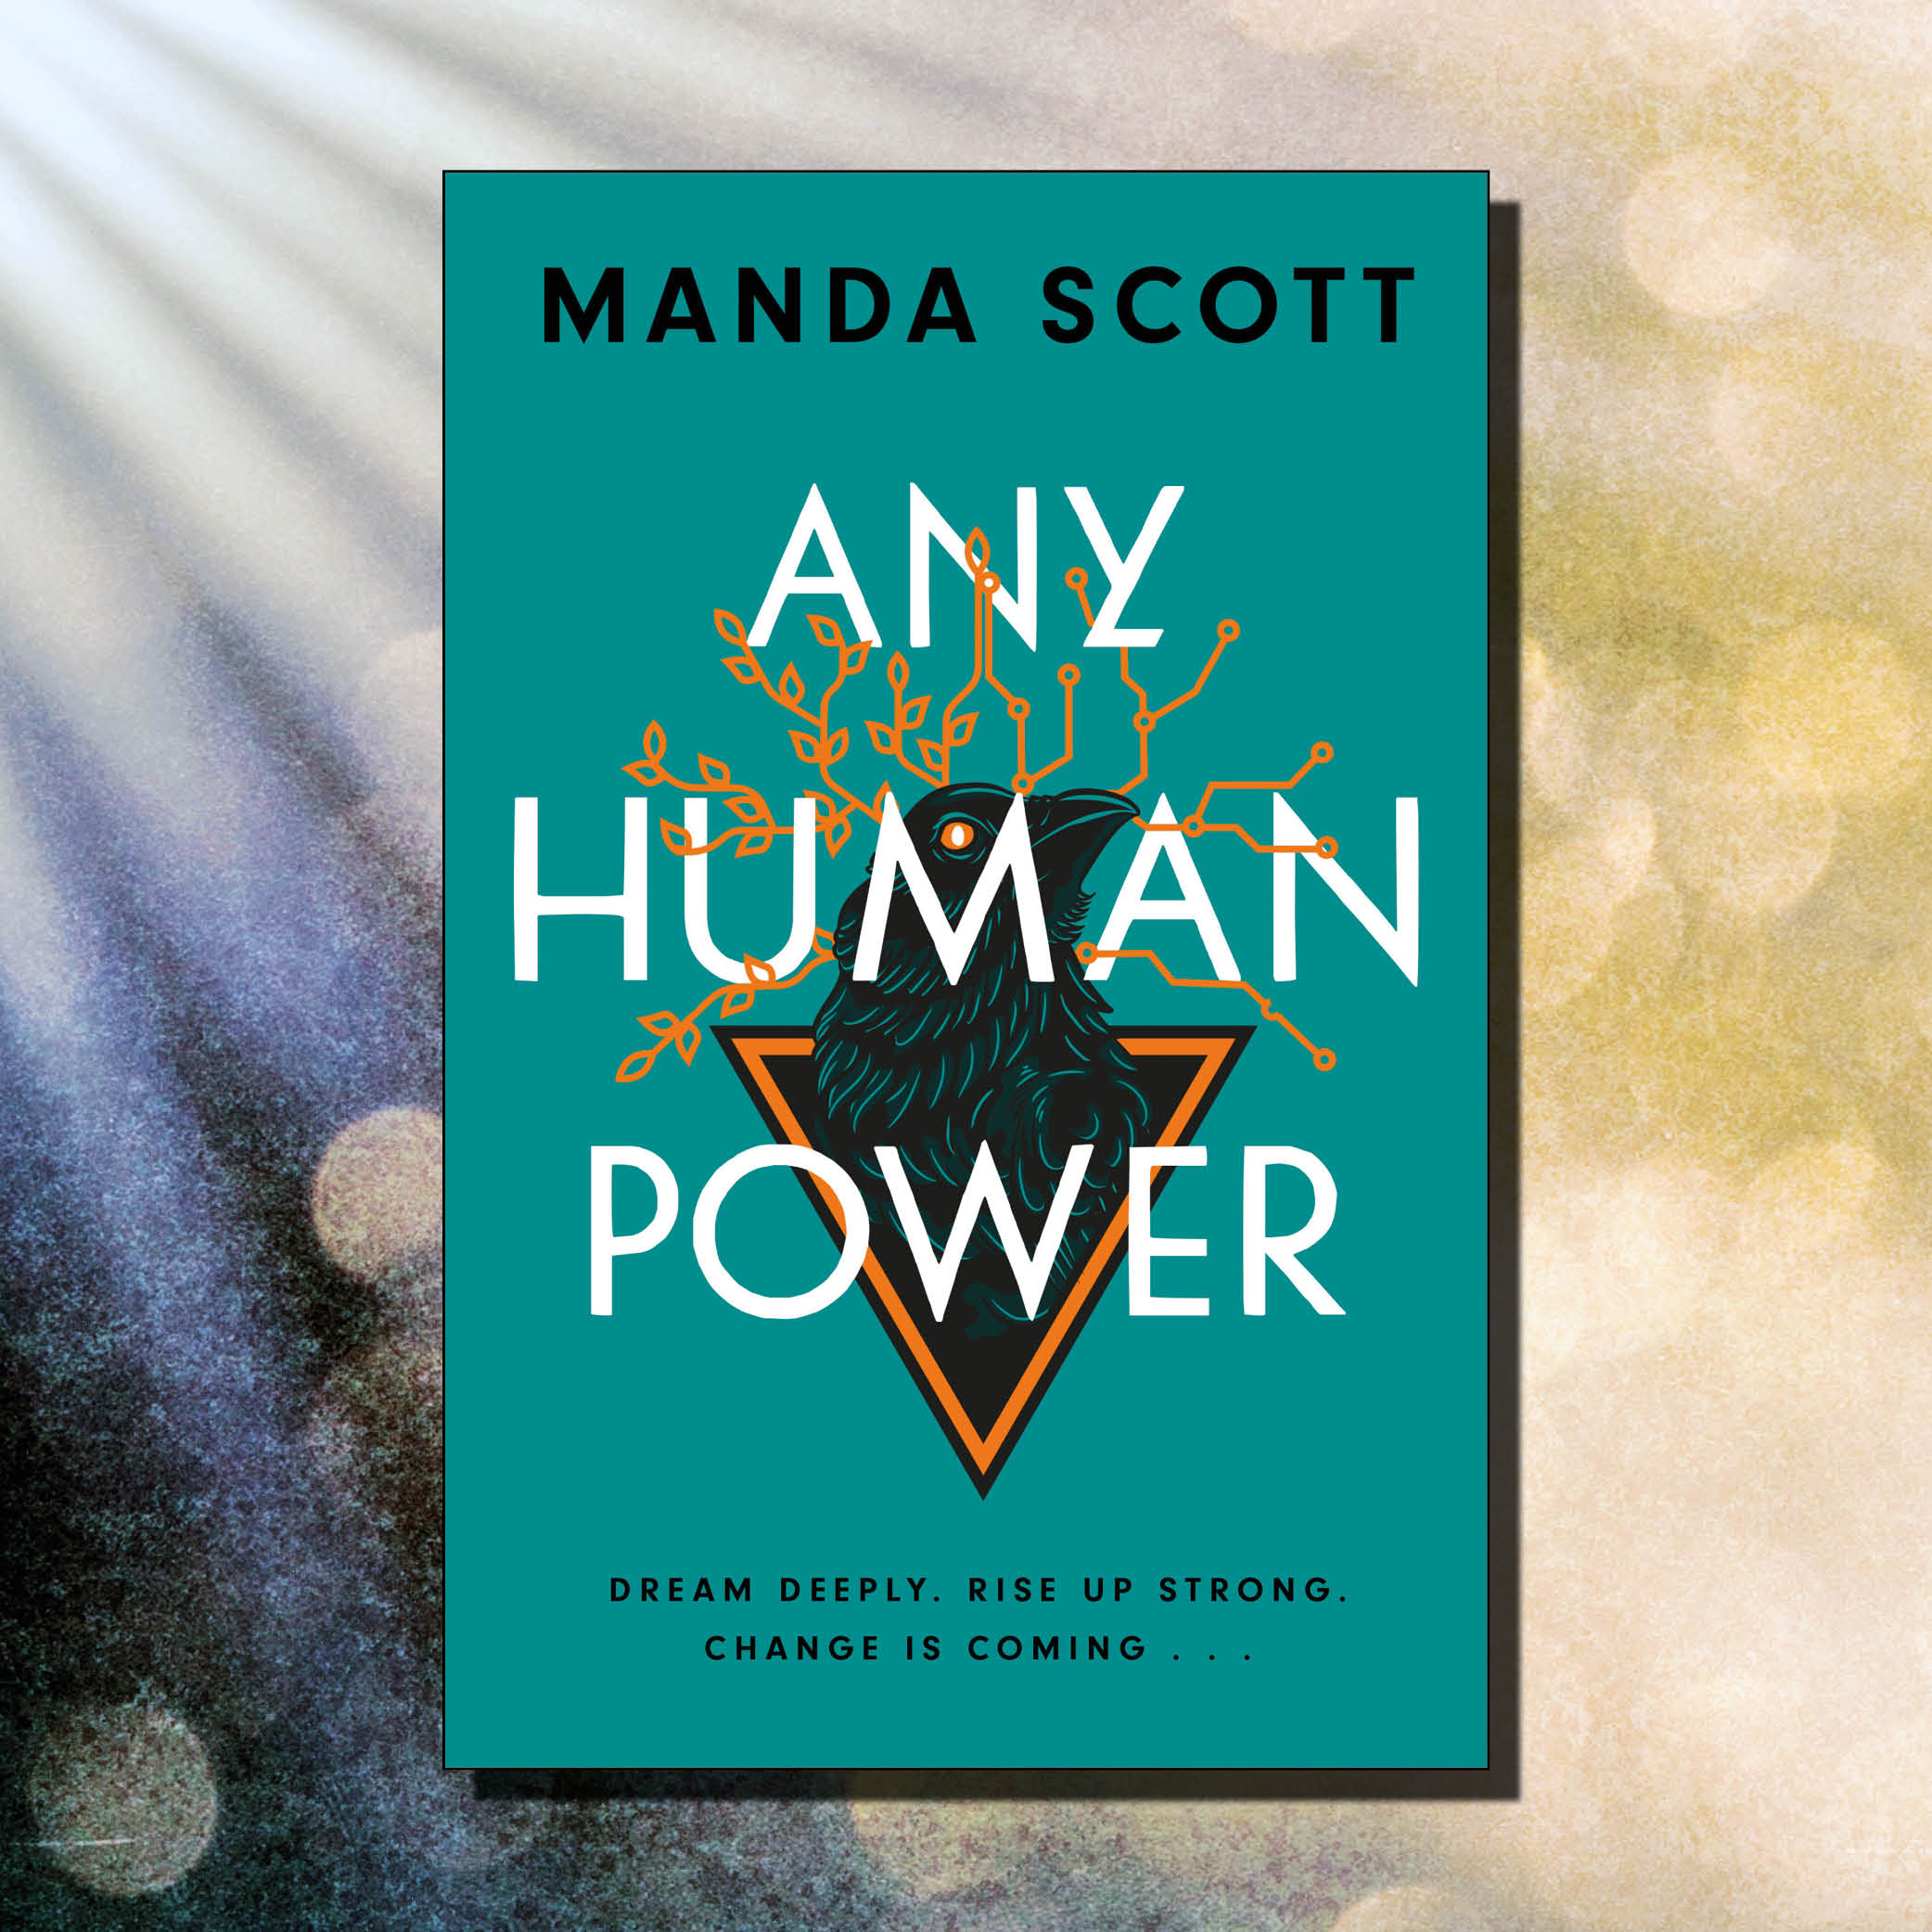 Manda Scott's new novel, 'Any Human Power' is an exploration of how we might transition to another world that is possible, with a mix of permaculture, regenerative agriculture, the power of community and many other new paradigm empowering ideas and practices.